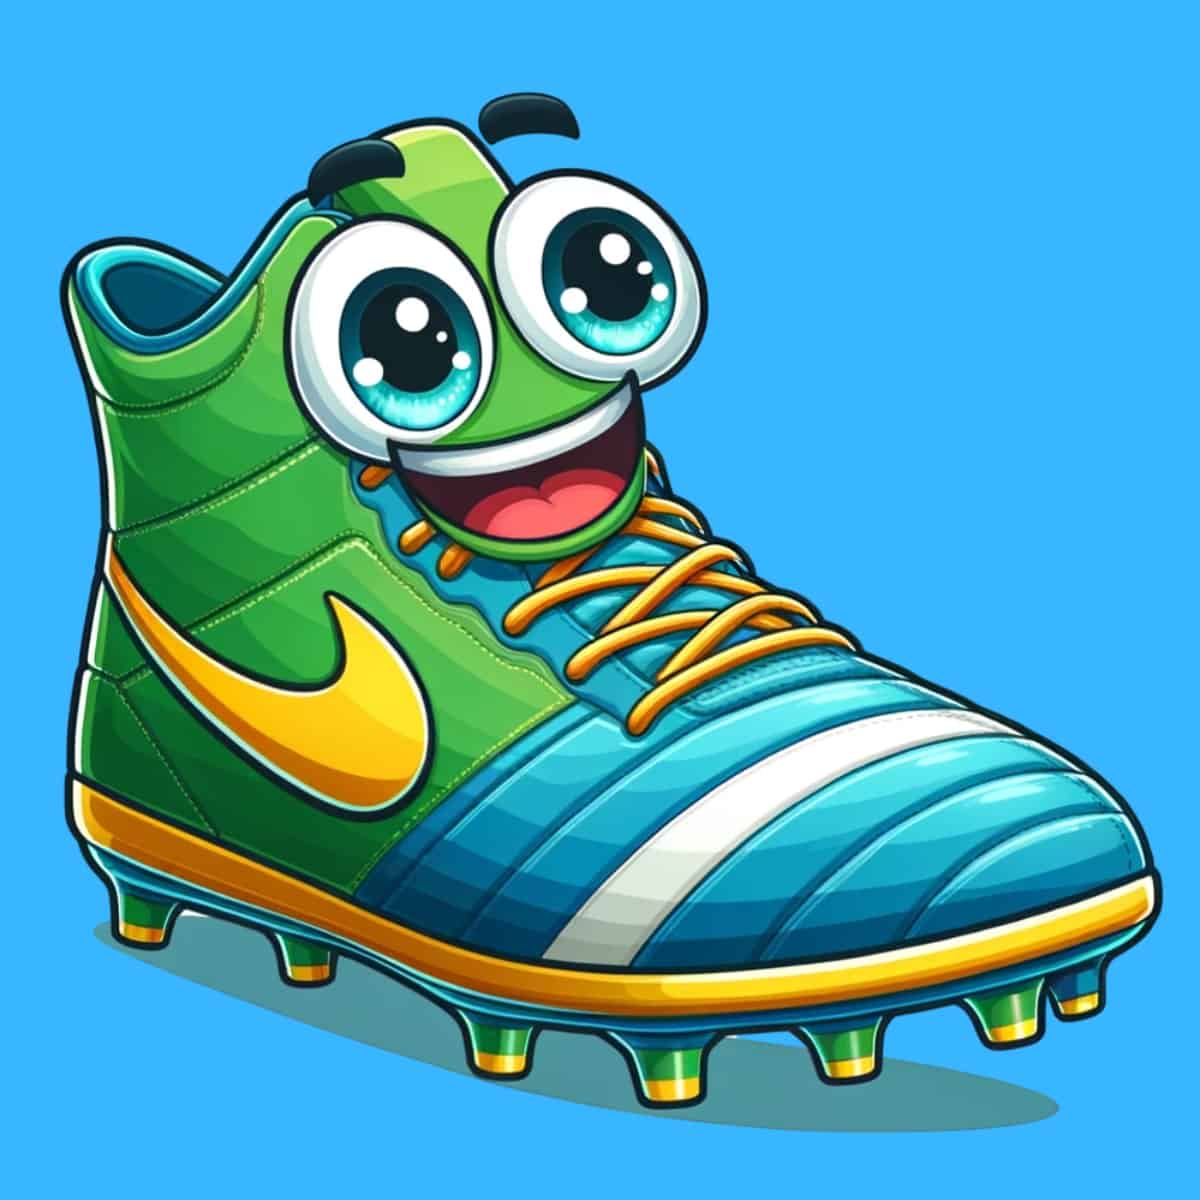 A cartoon graphic of a smiling soccer boot on a blue background.